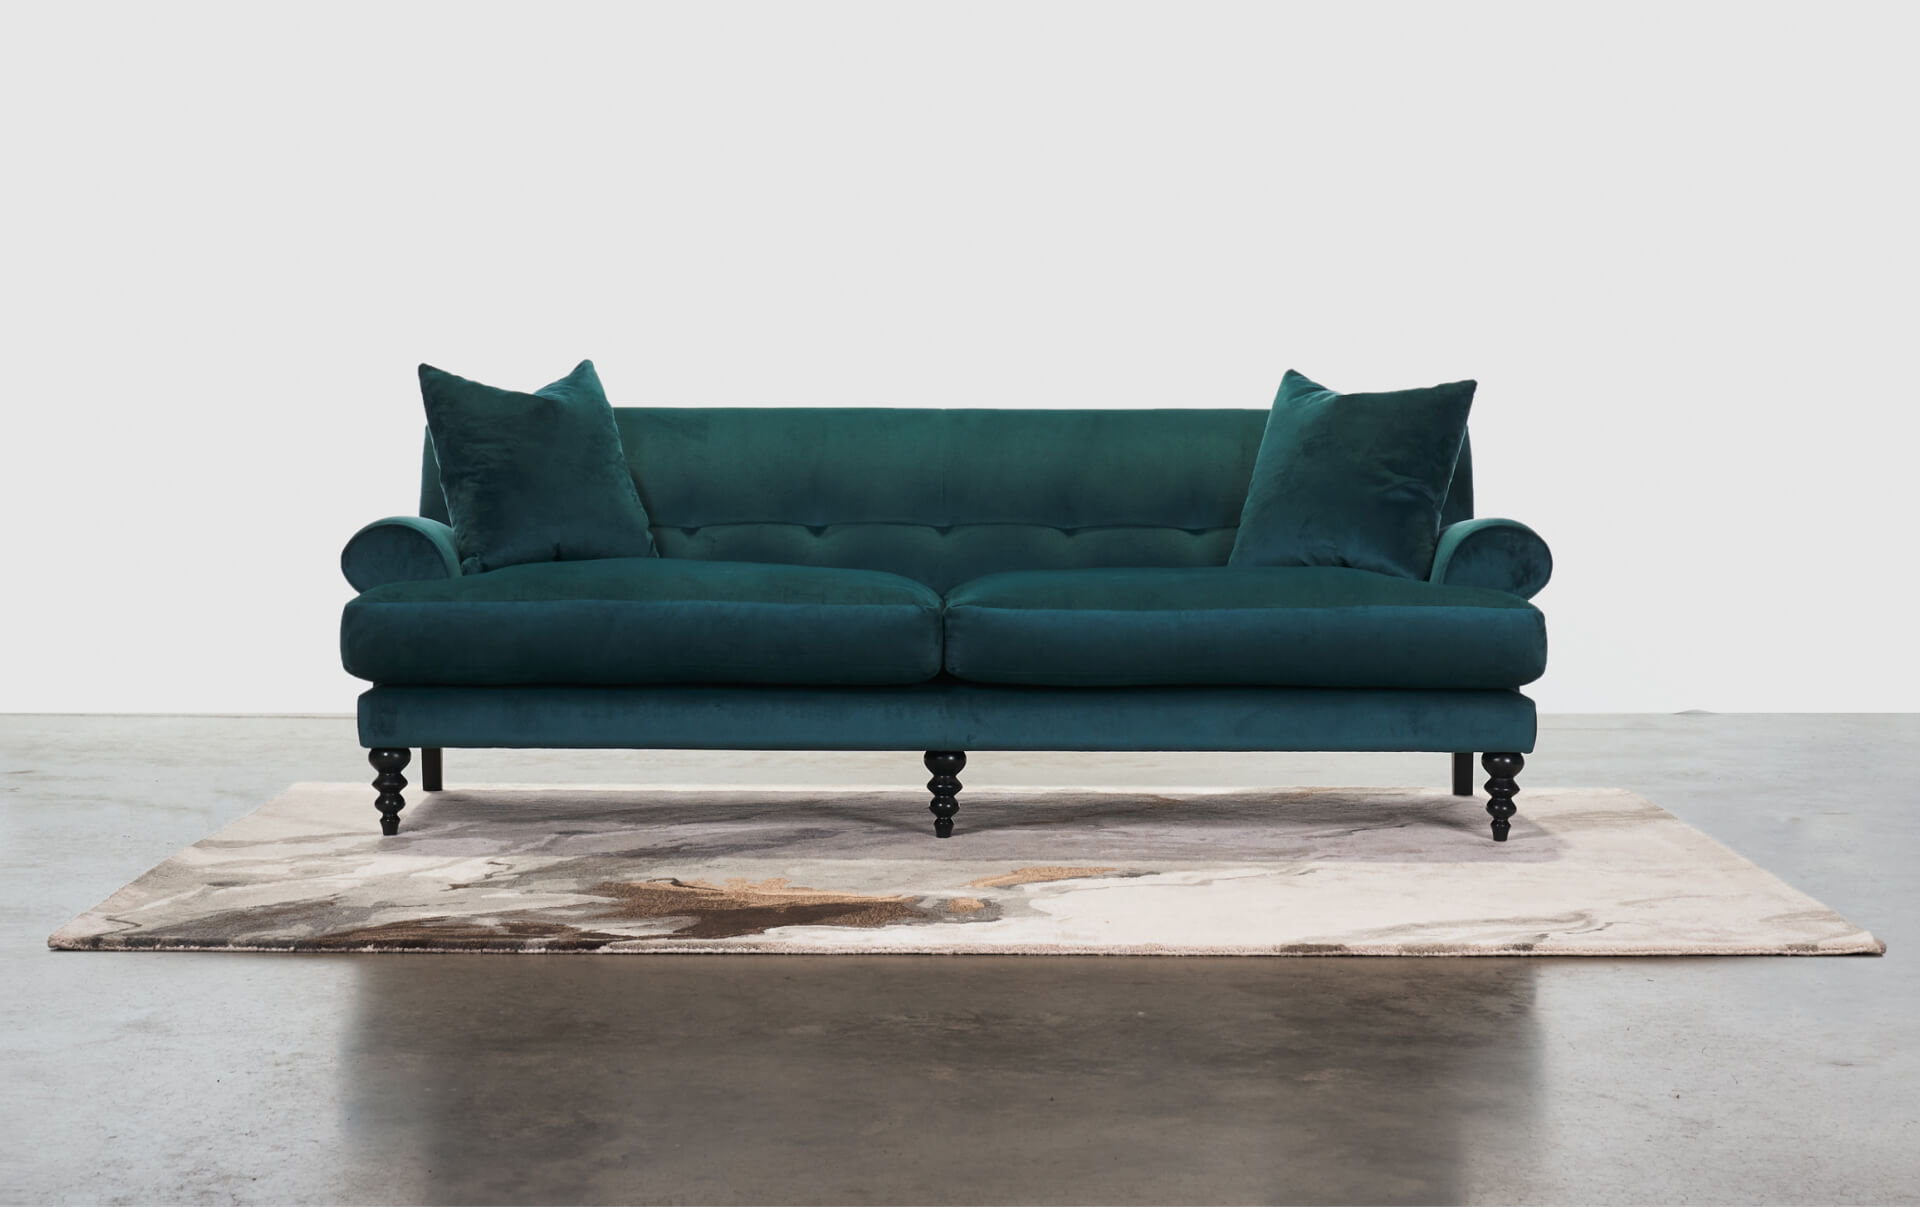 A dark green sofa placed on a light colored carpet.